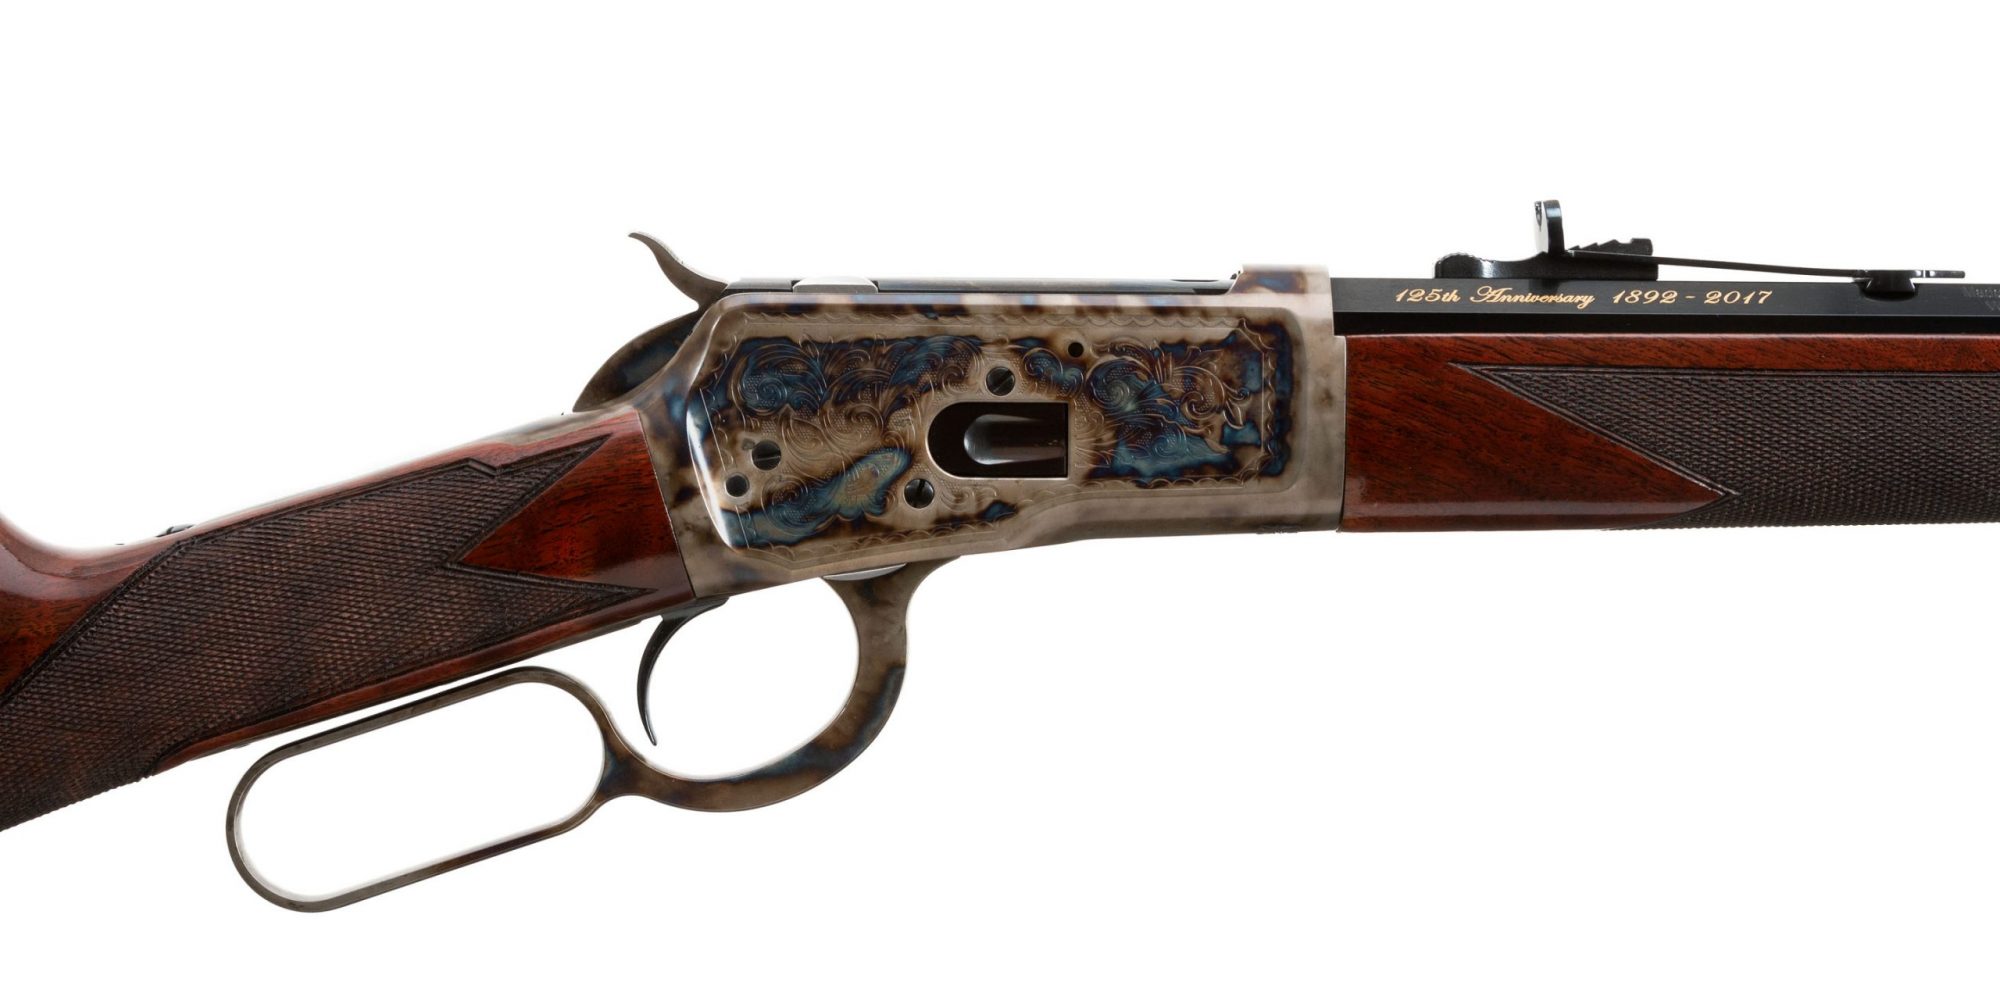 Photo of a new, color case hardened Winchester 1892 125th Anniversary rifle, featuring bone charcoal color case hardening by Turnbull Restoration of Bloomfield, NY